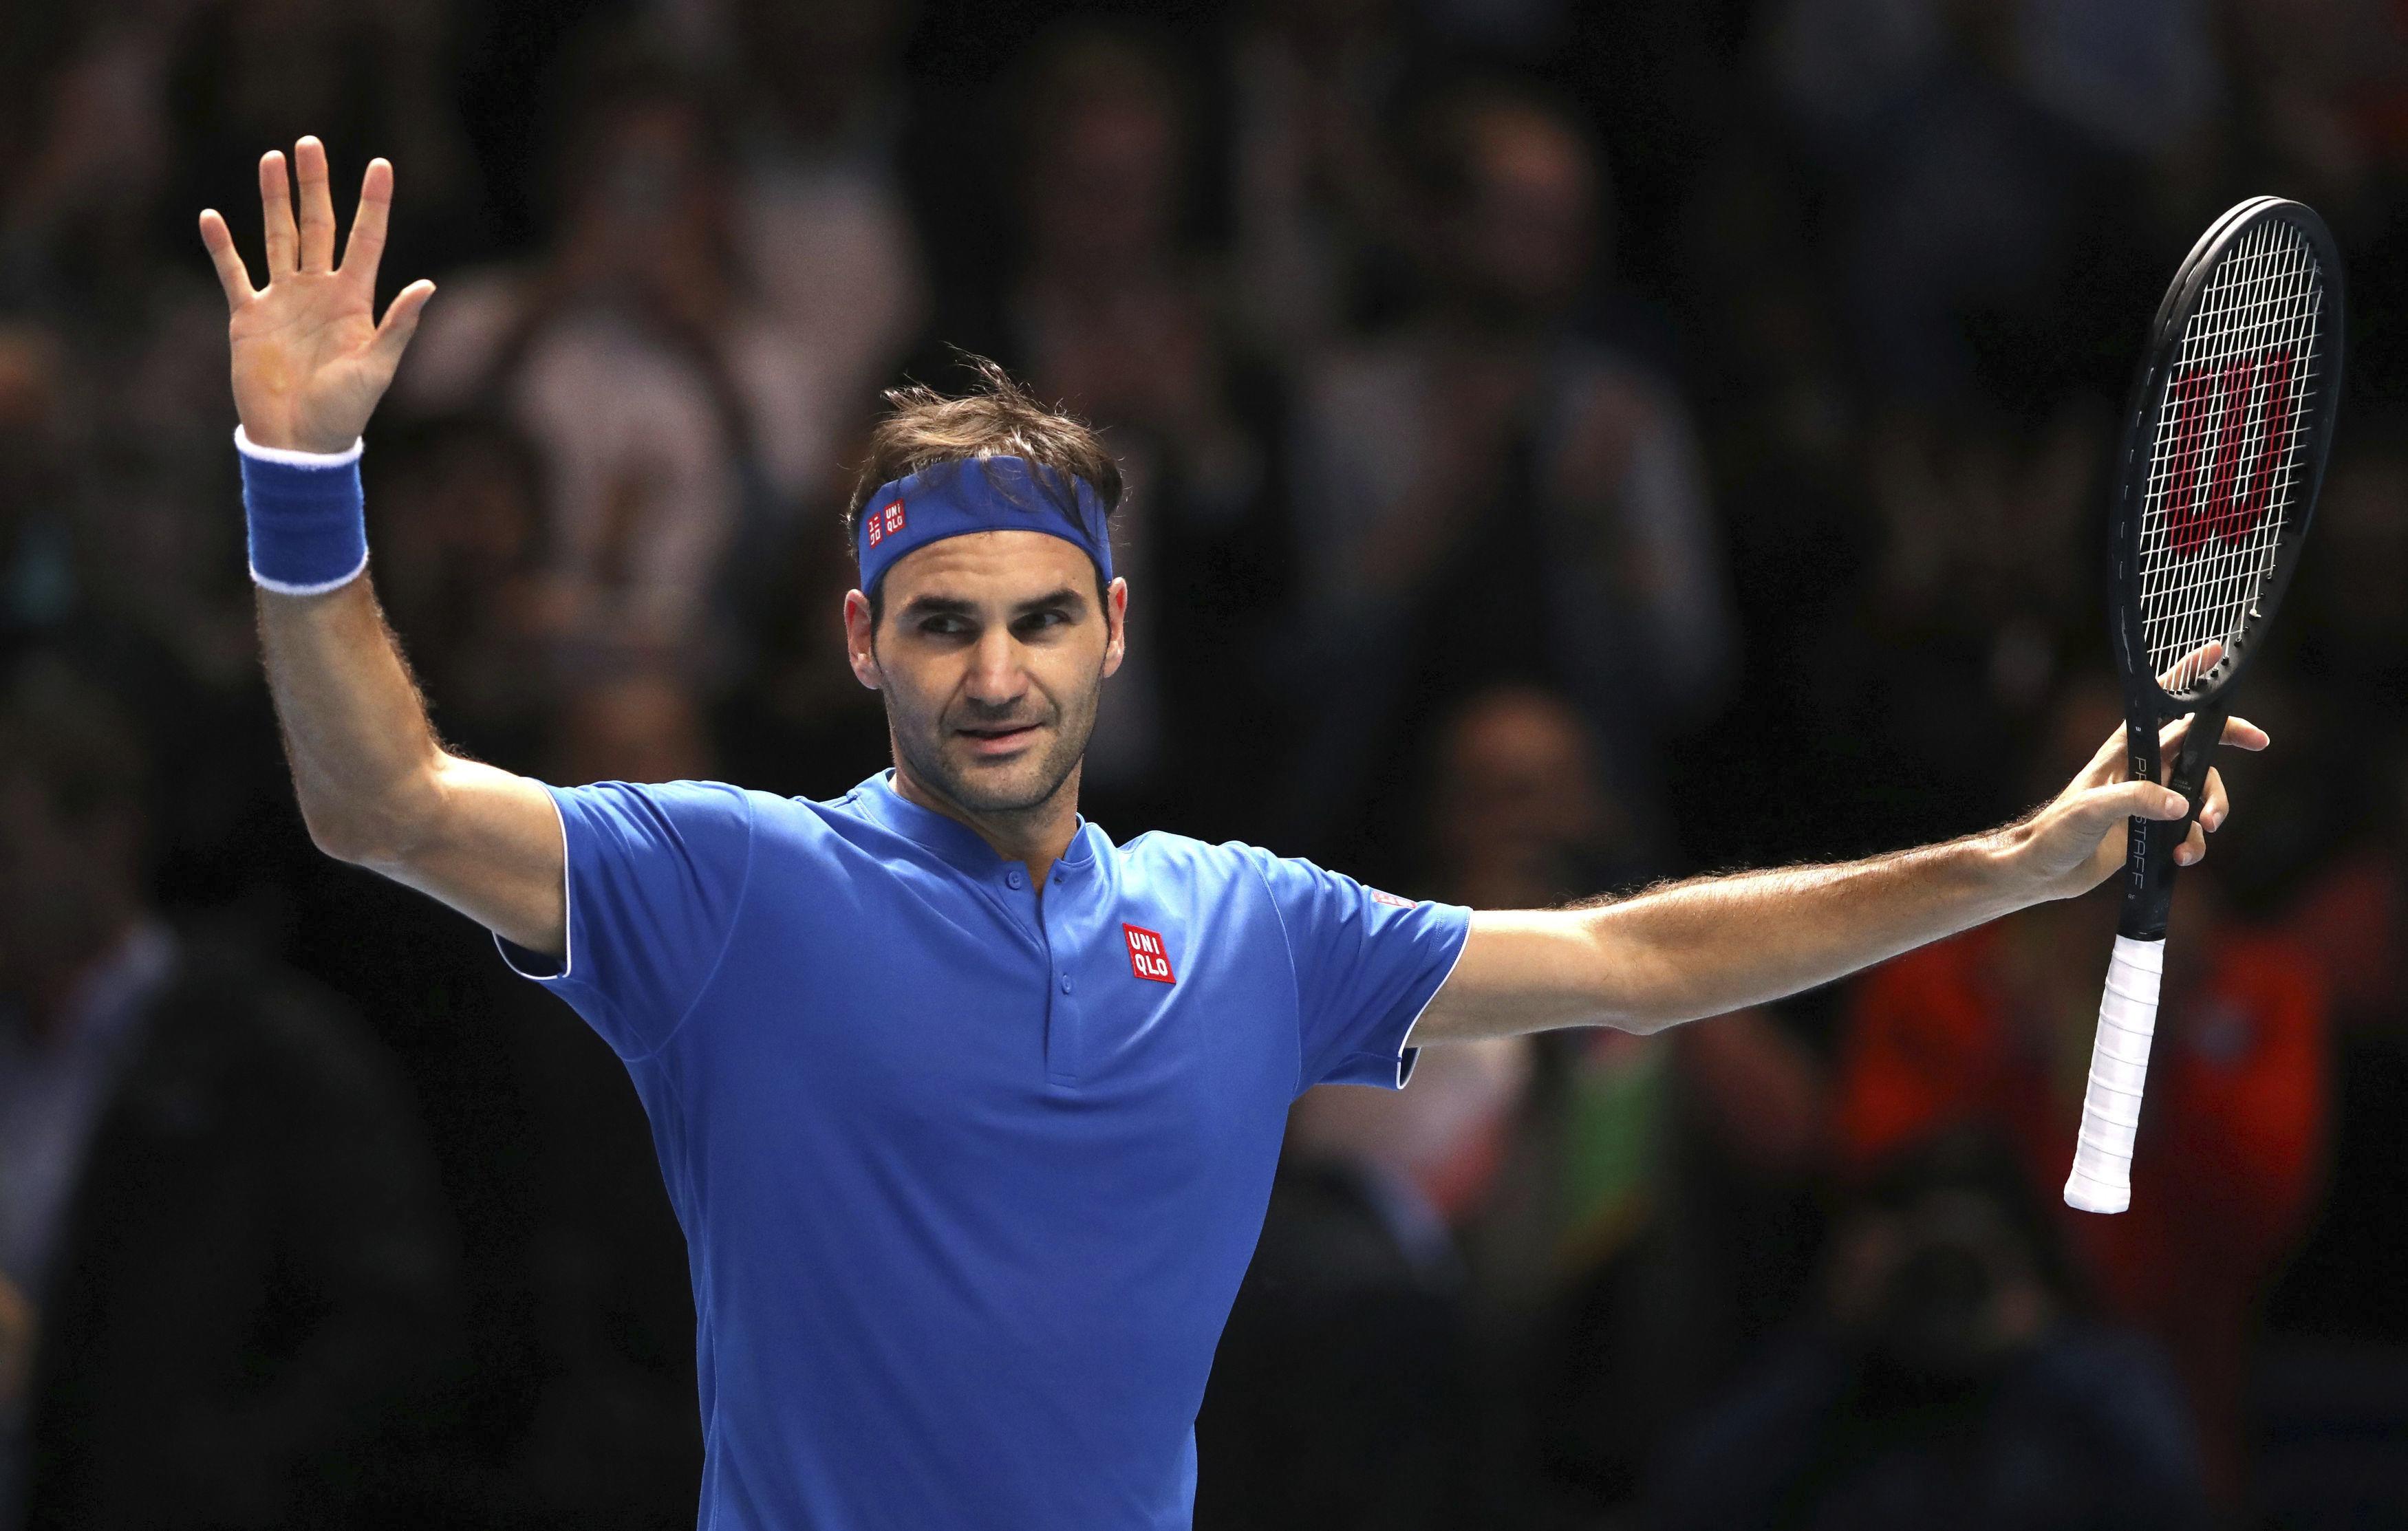 Roger Federer advances to record-extending 15th ATP Finals semi | The Spokesman-Review3500 x 2226